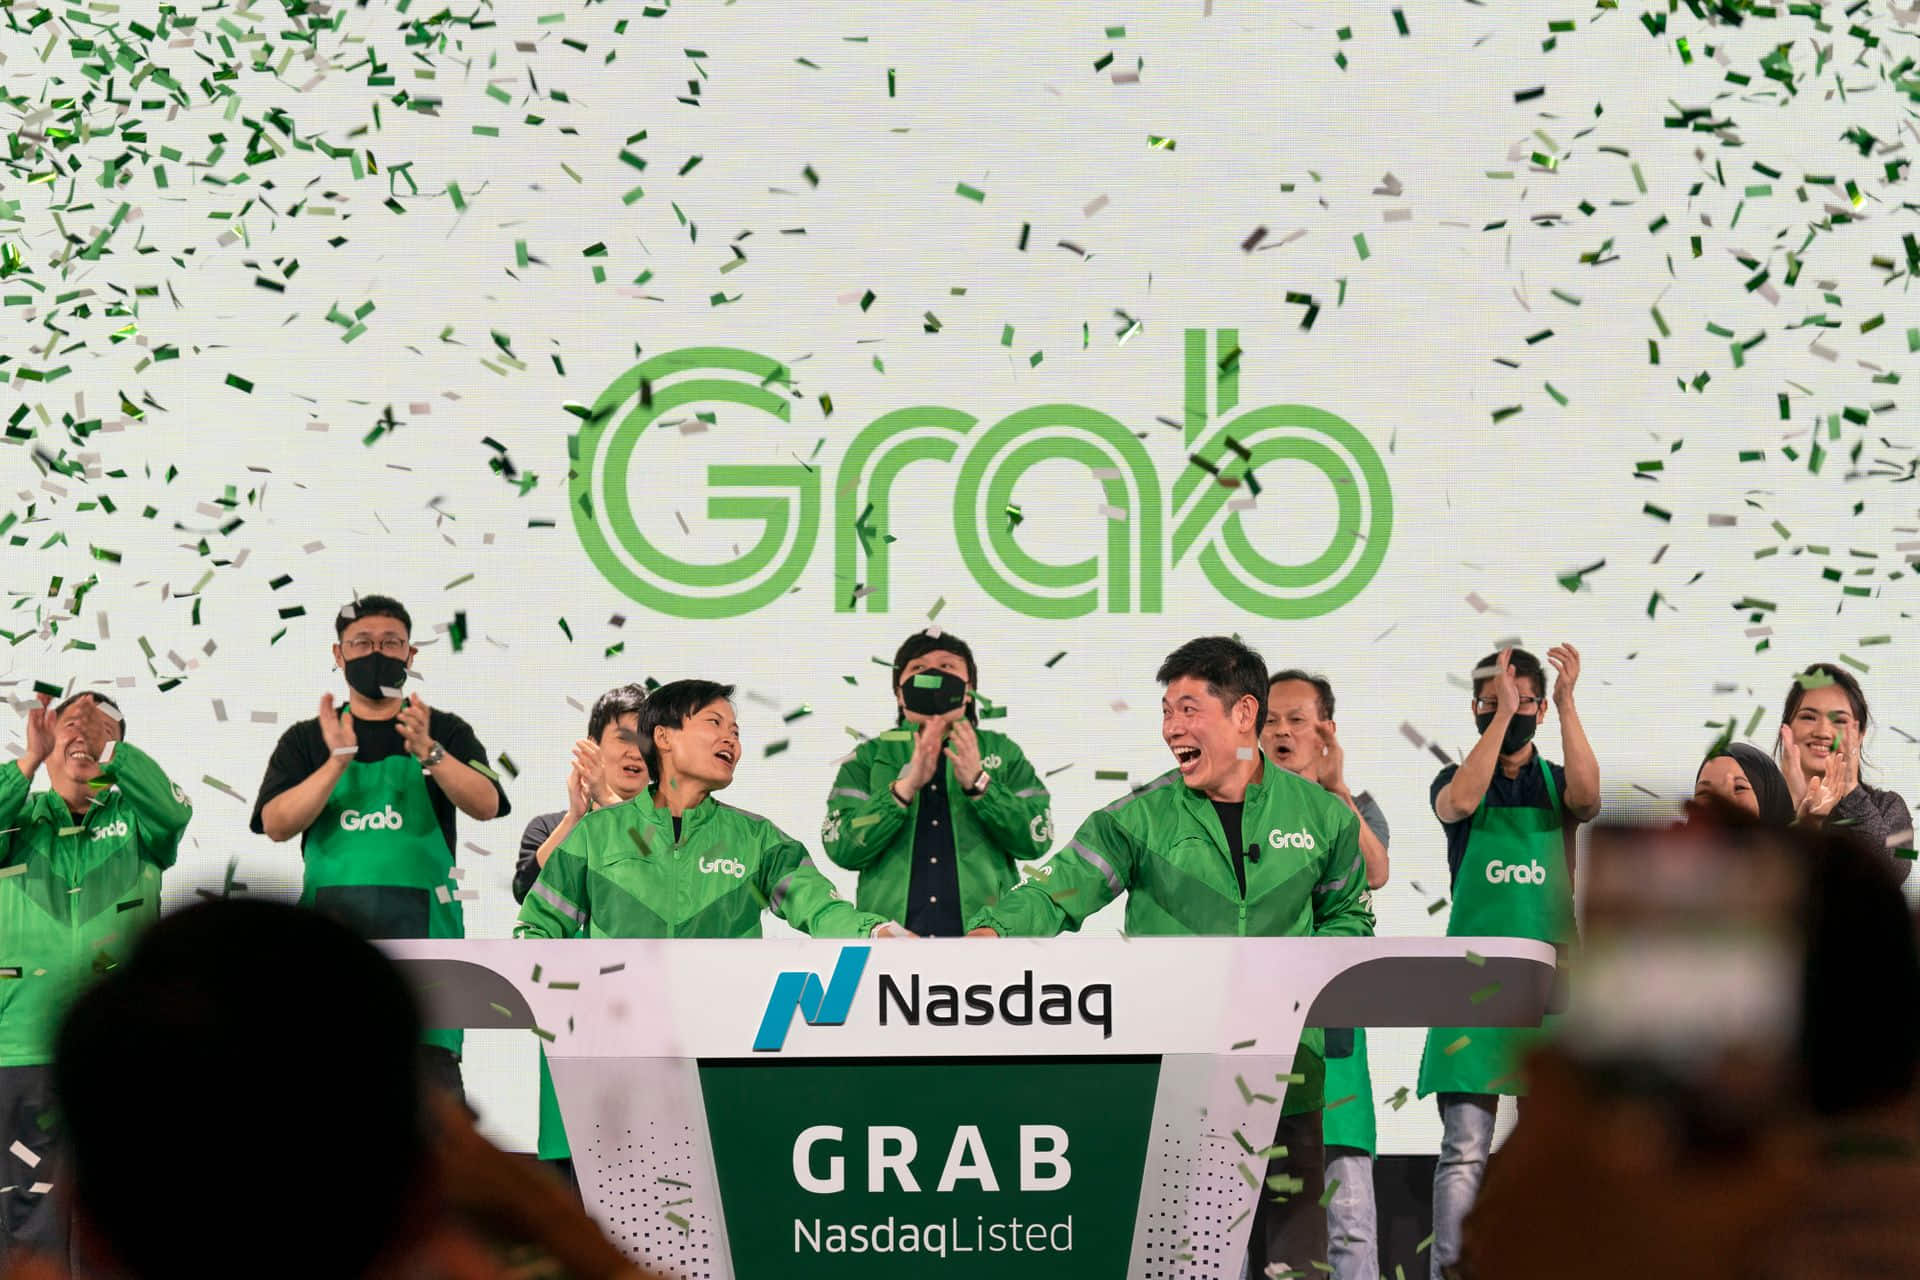 1 Grab Co Founders ring the Opening Bell in Singapore as Grab goes public on Nasdaq